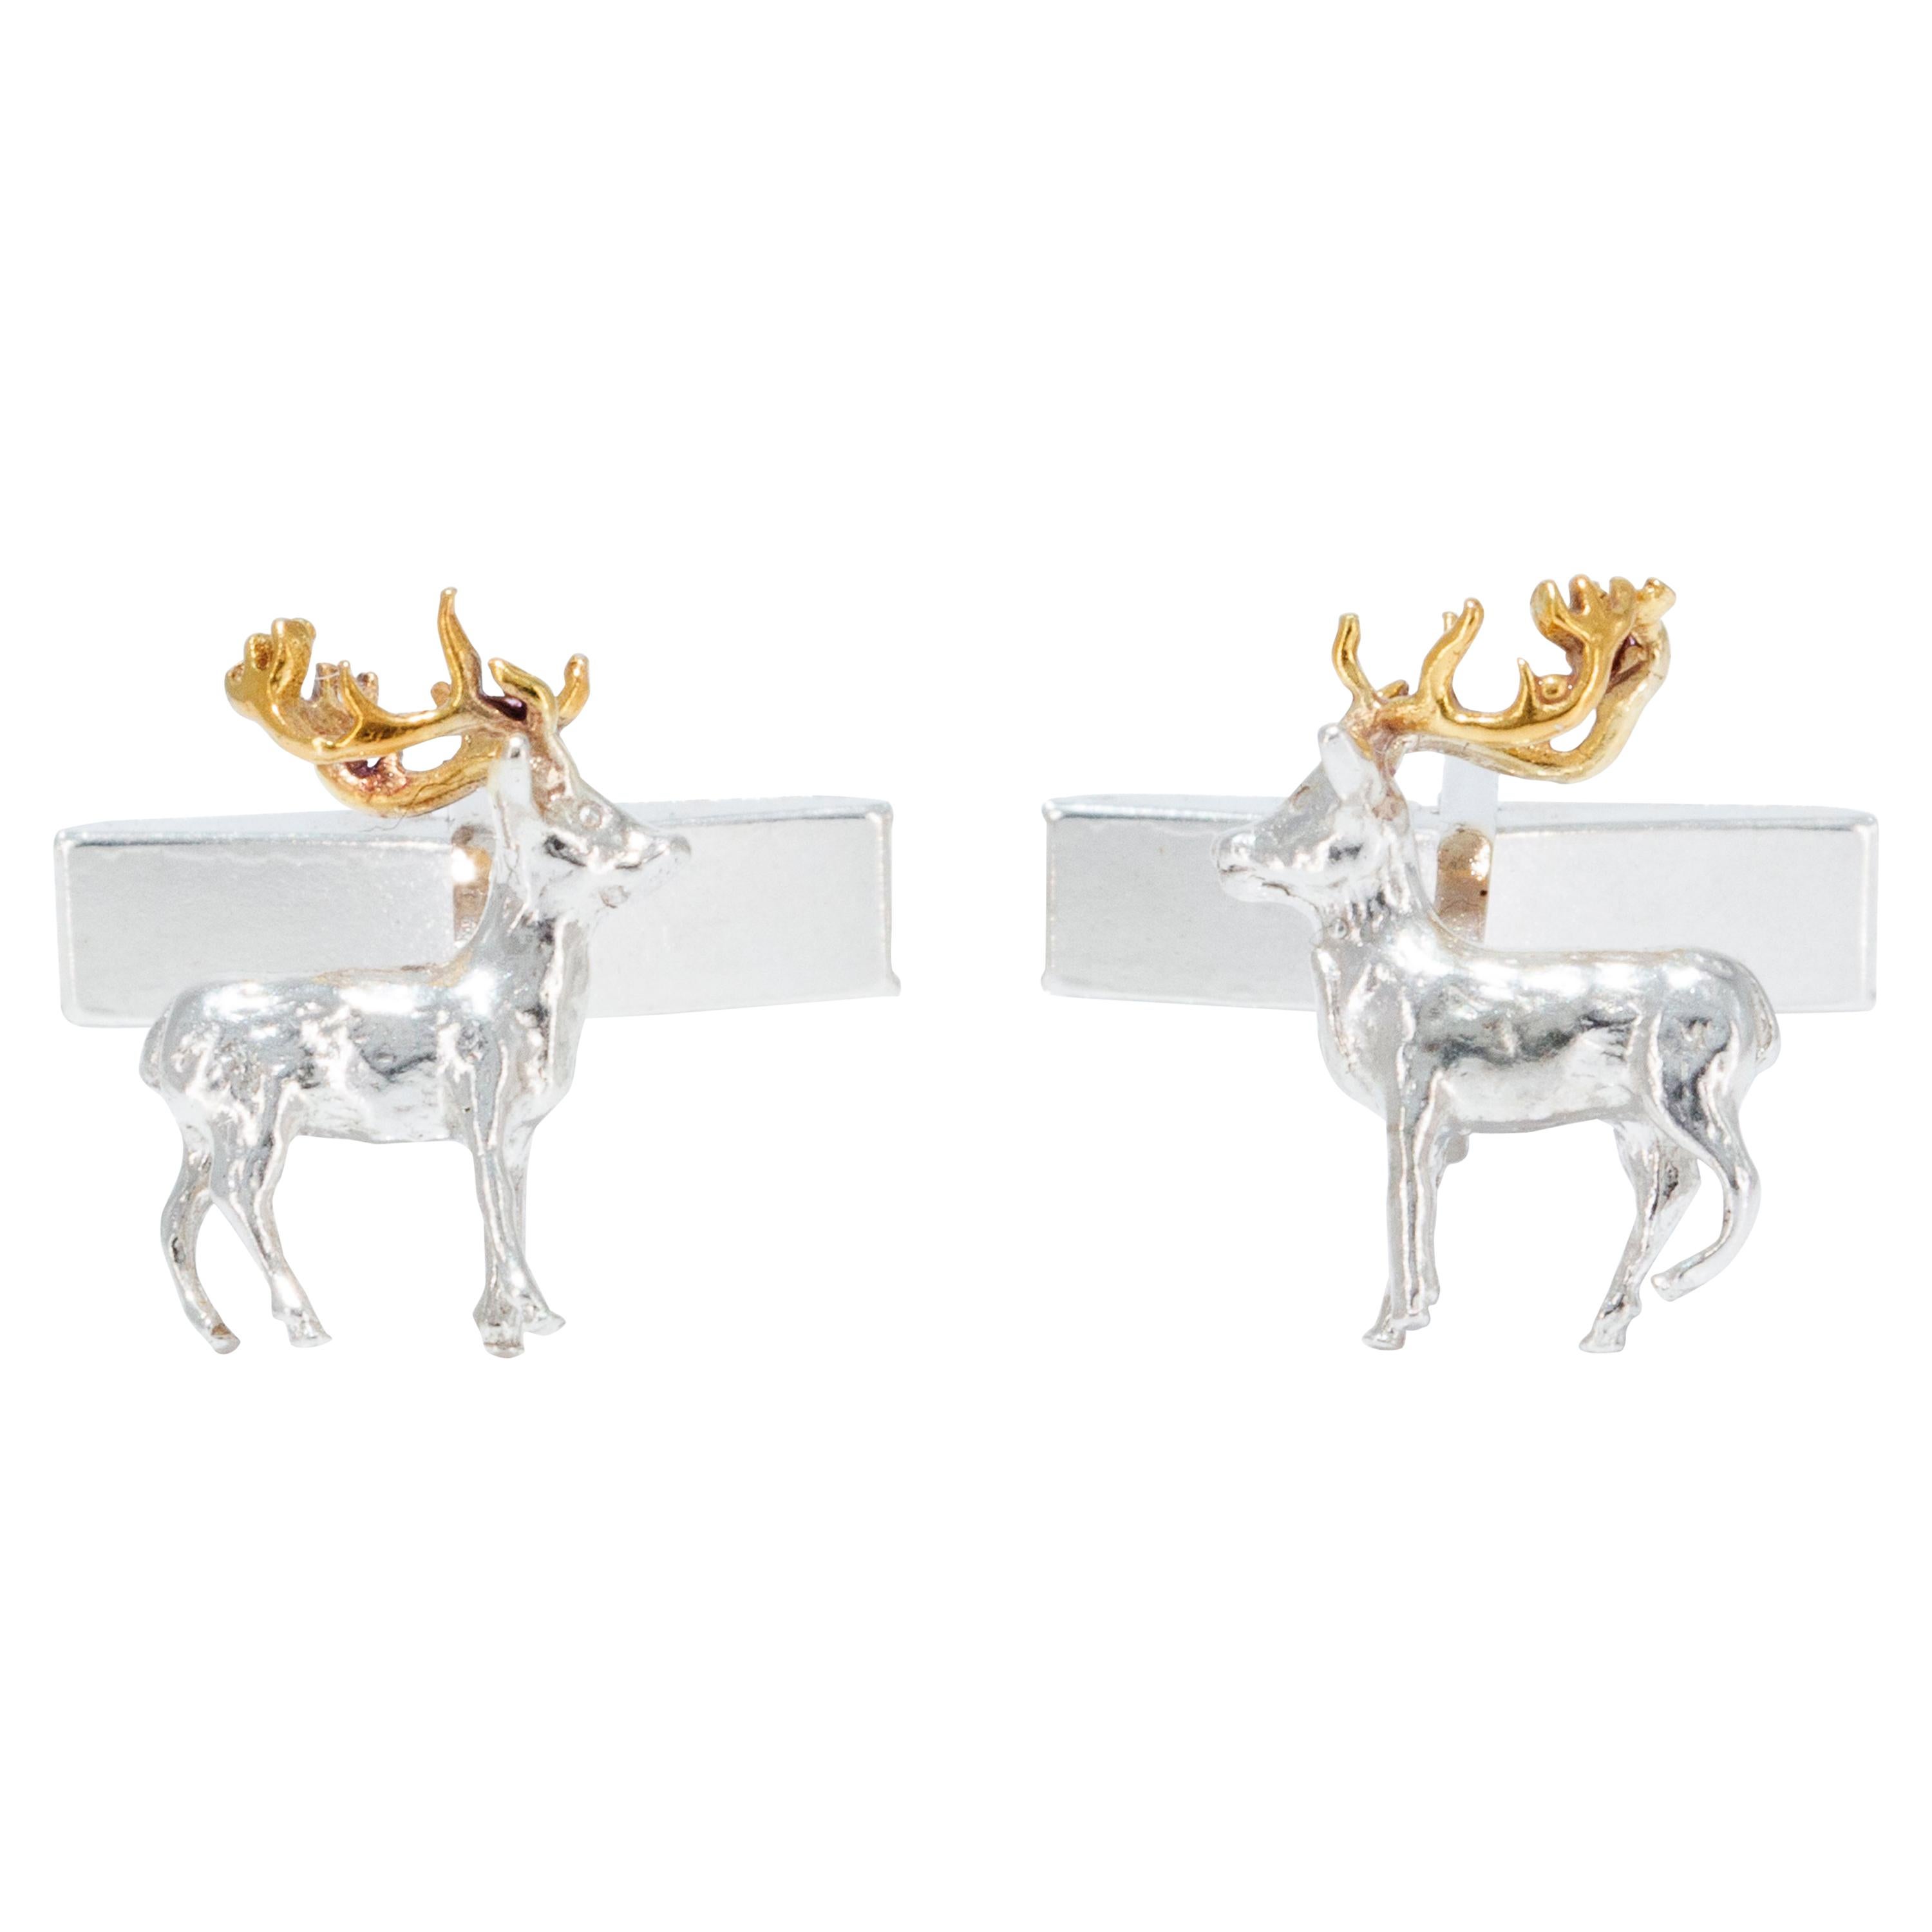 Stag Cufflinks in 18 Karat Gold on Sterling Silver For Sale